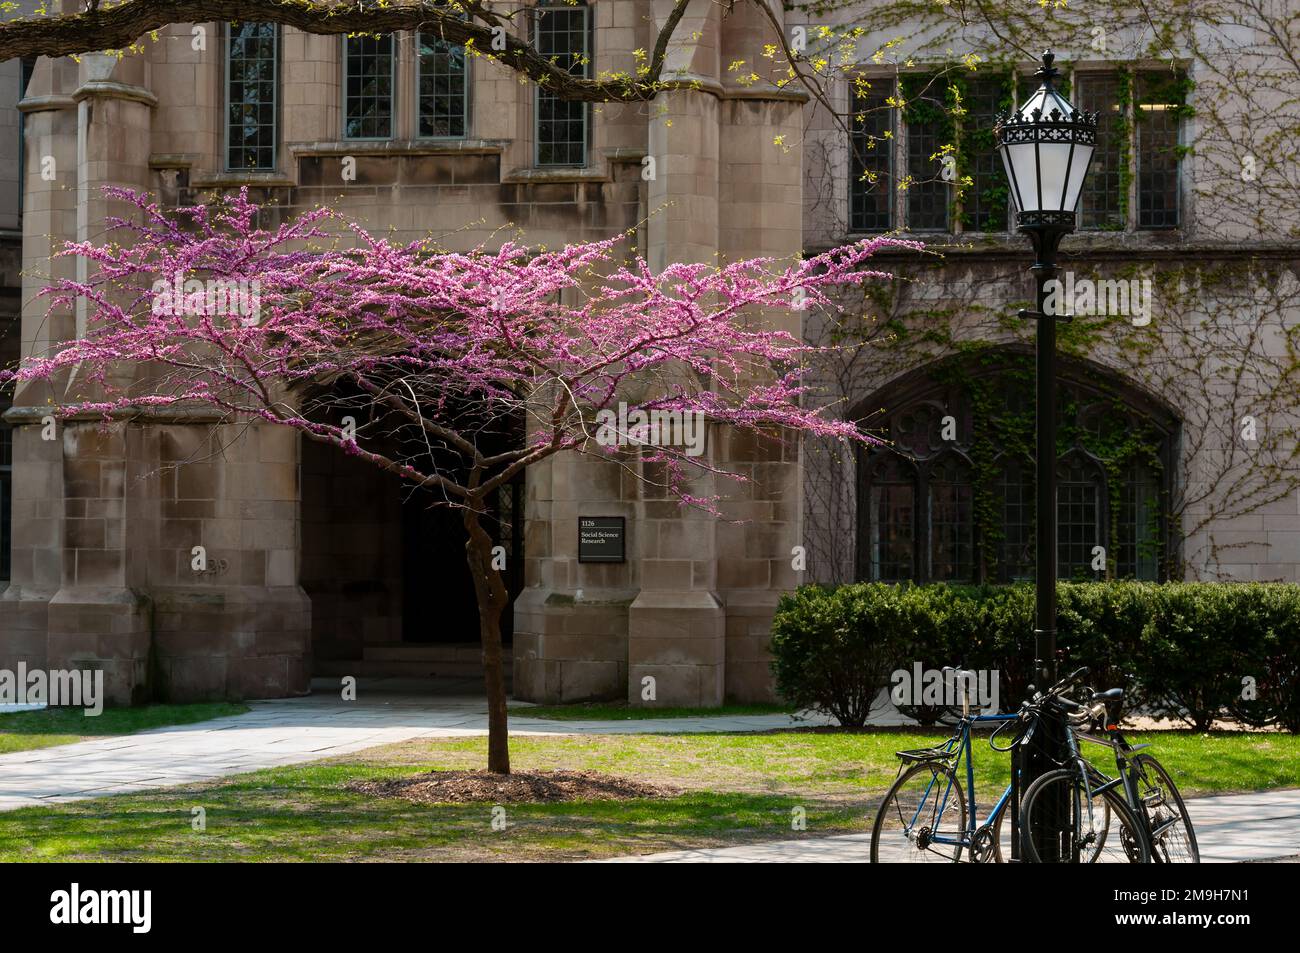 Cherry blossom tree in front of School of Social Science, University of Chicago, Chicago, Illinois, USA Stock Photo